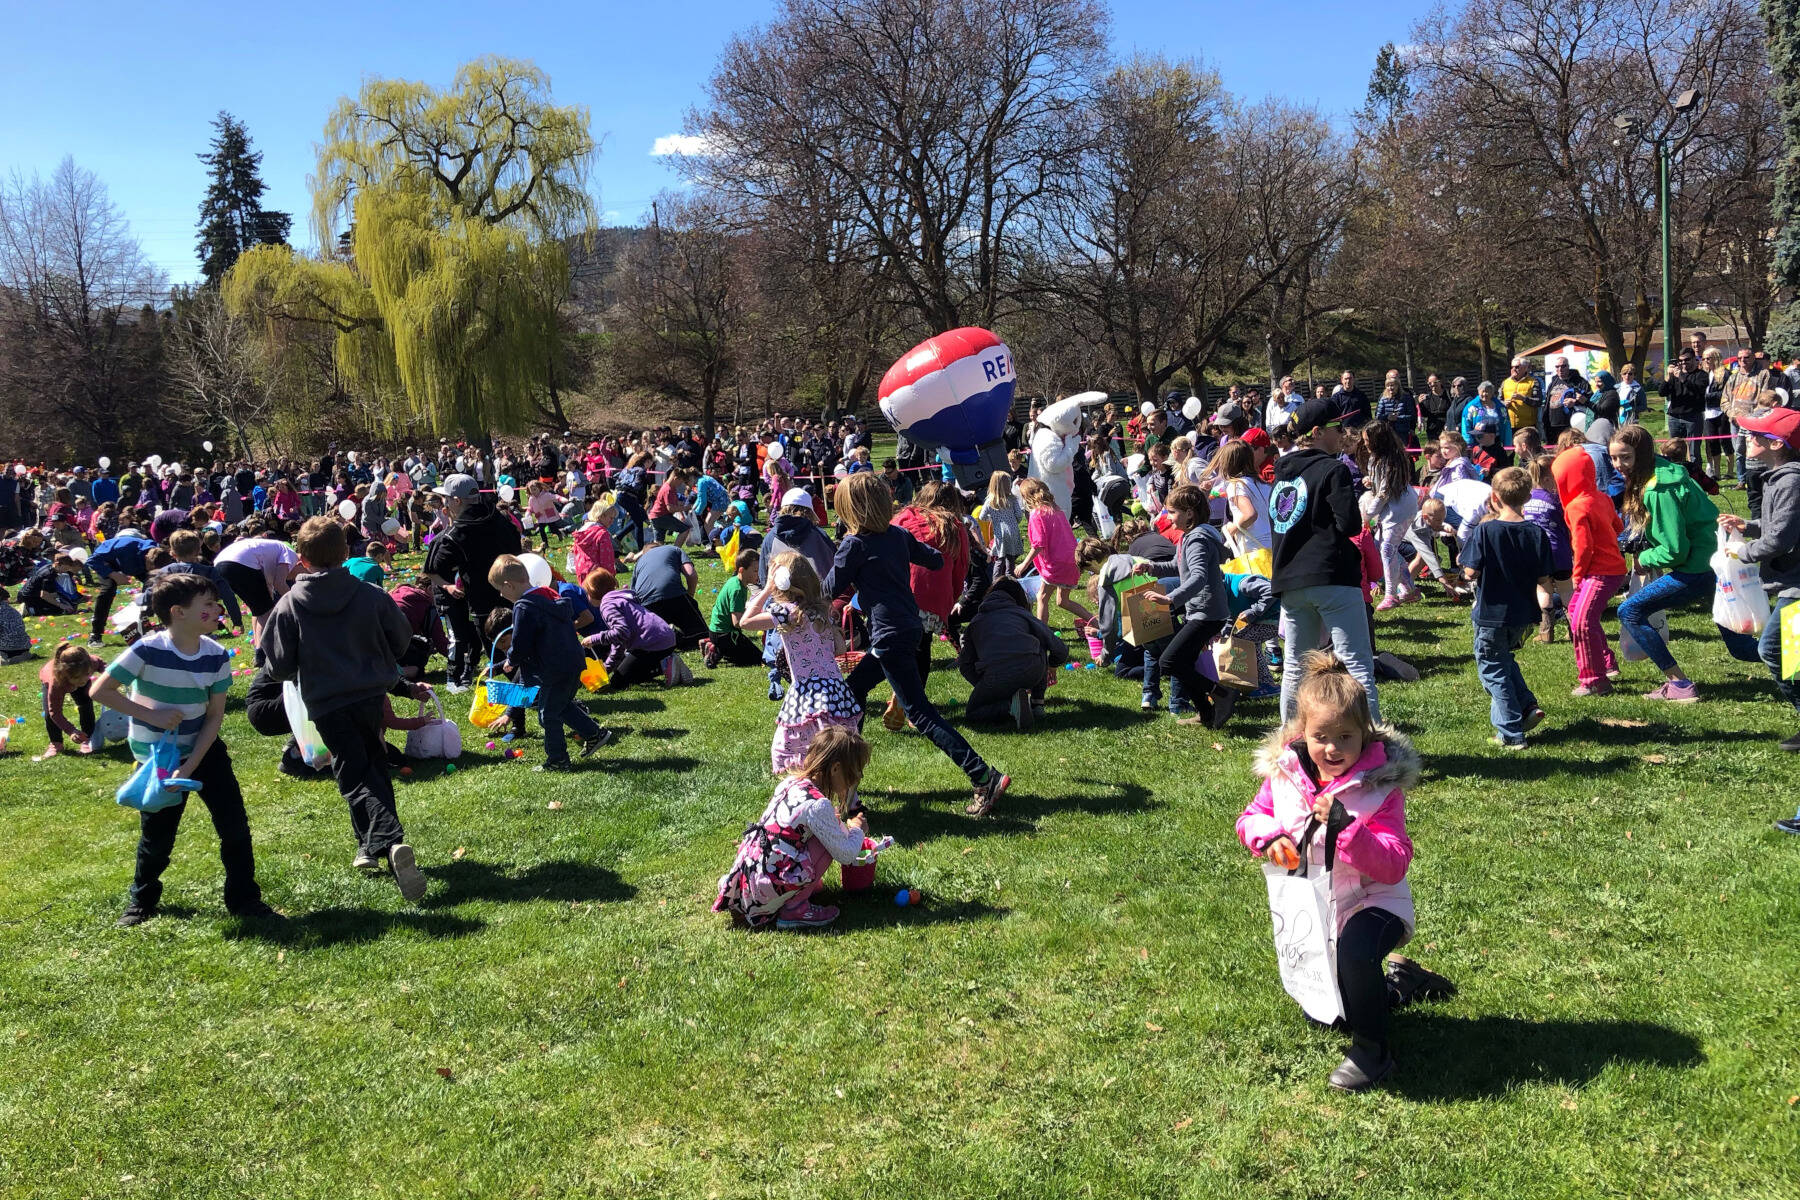 Children hunt for Easter eggs during the 2019 Easter Egg-stravaganza in Summerland. Egg hunts and other celebrations are part of the festivities during the Easter weekend. (Black Press file photo)